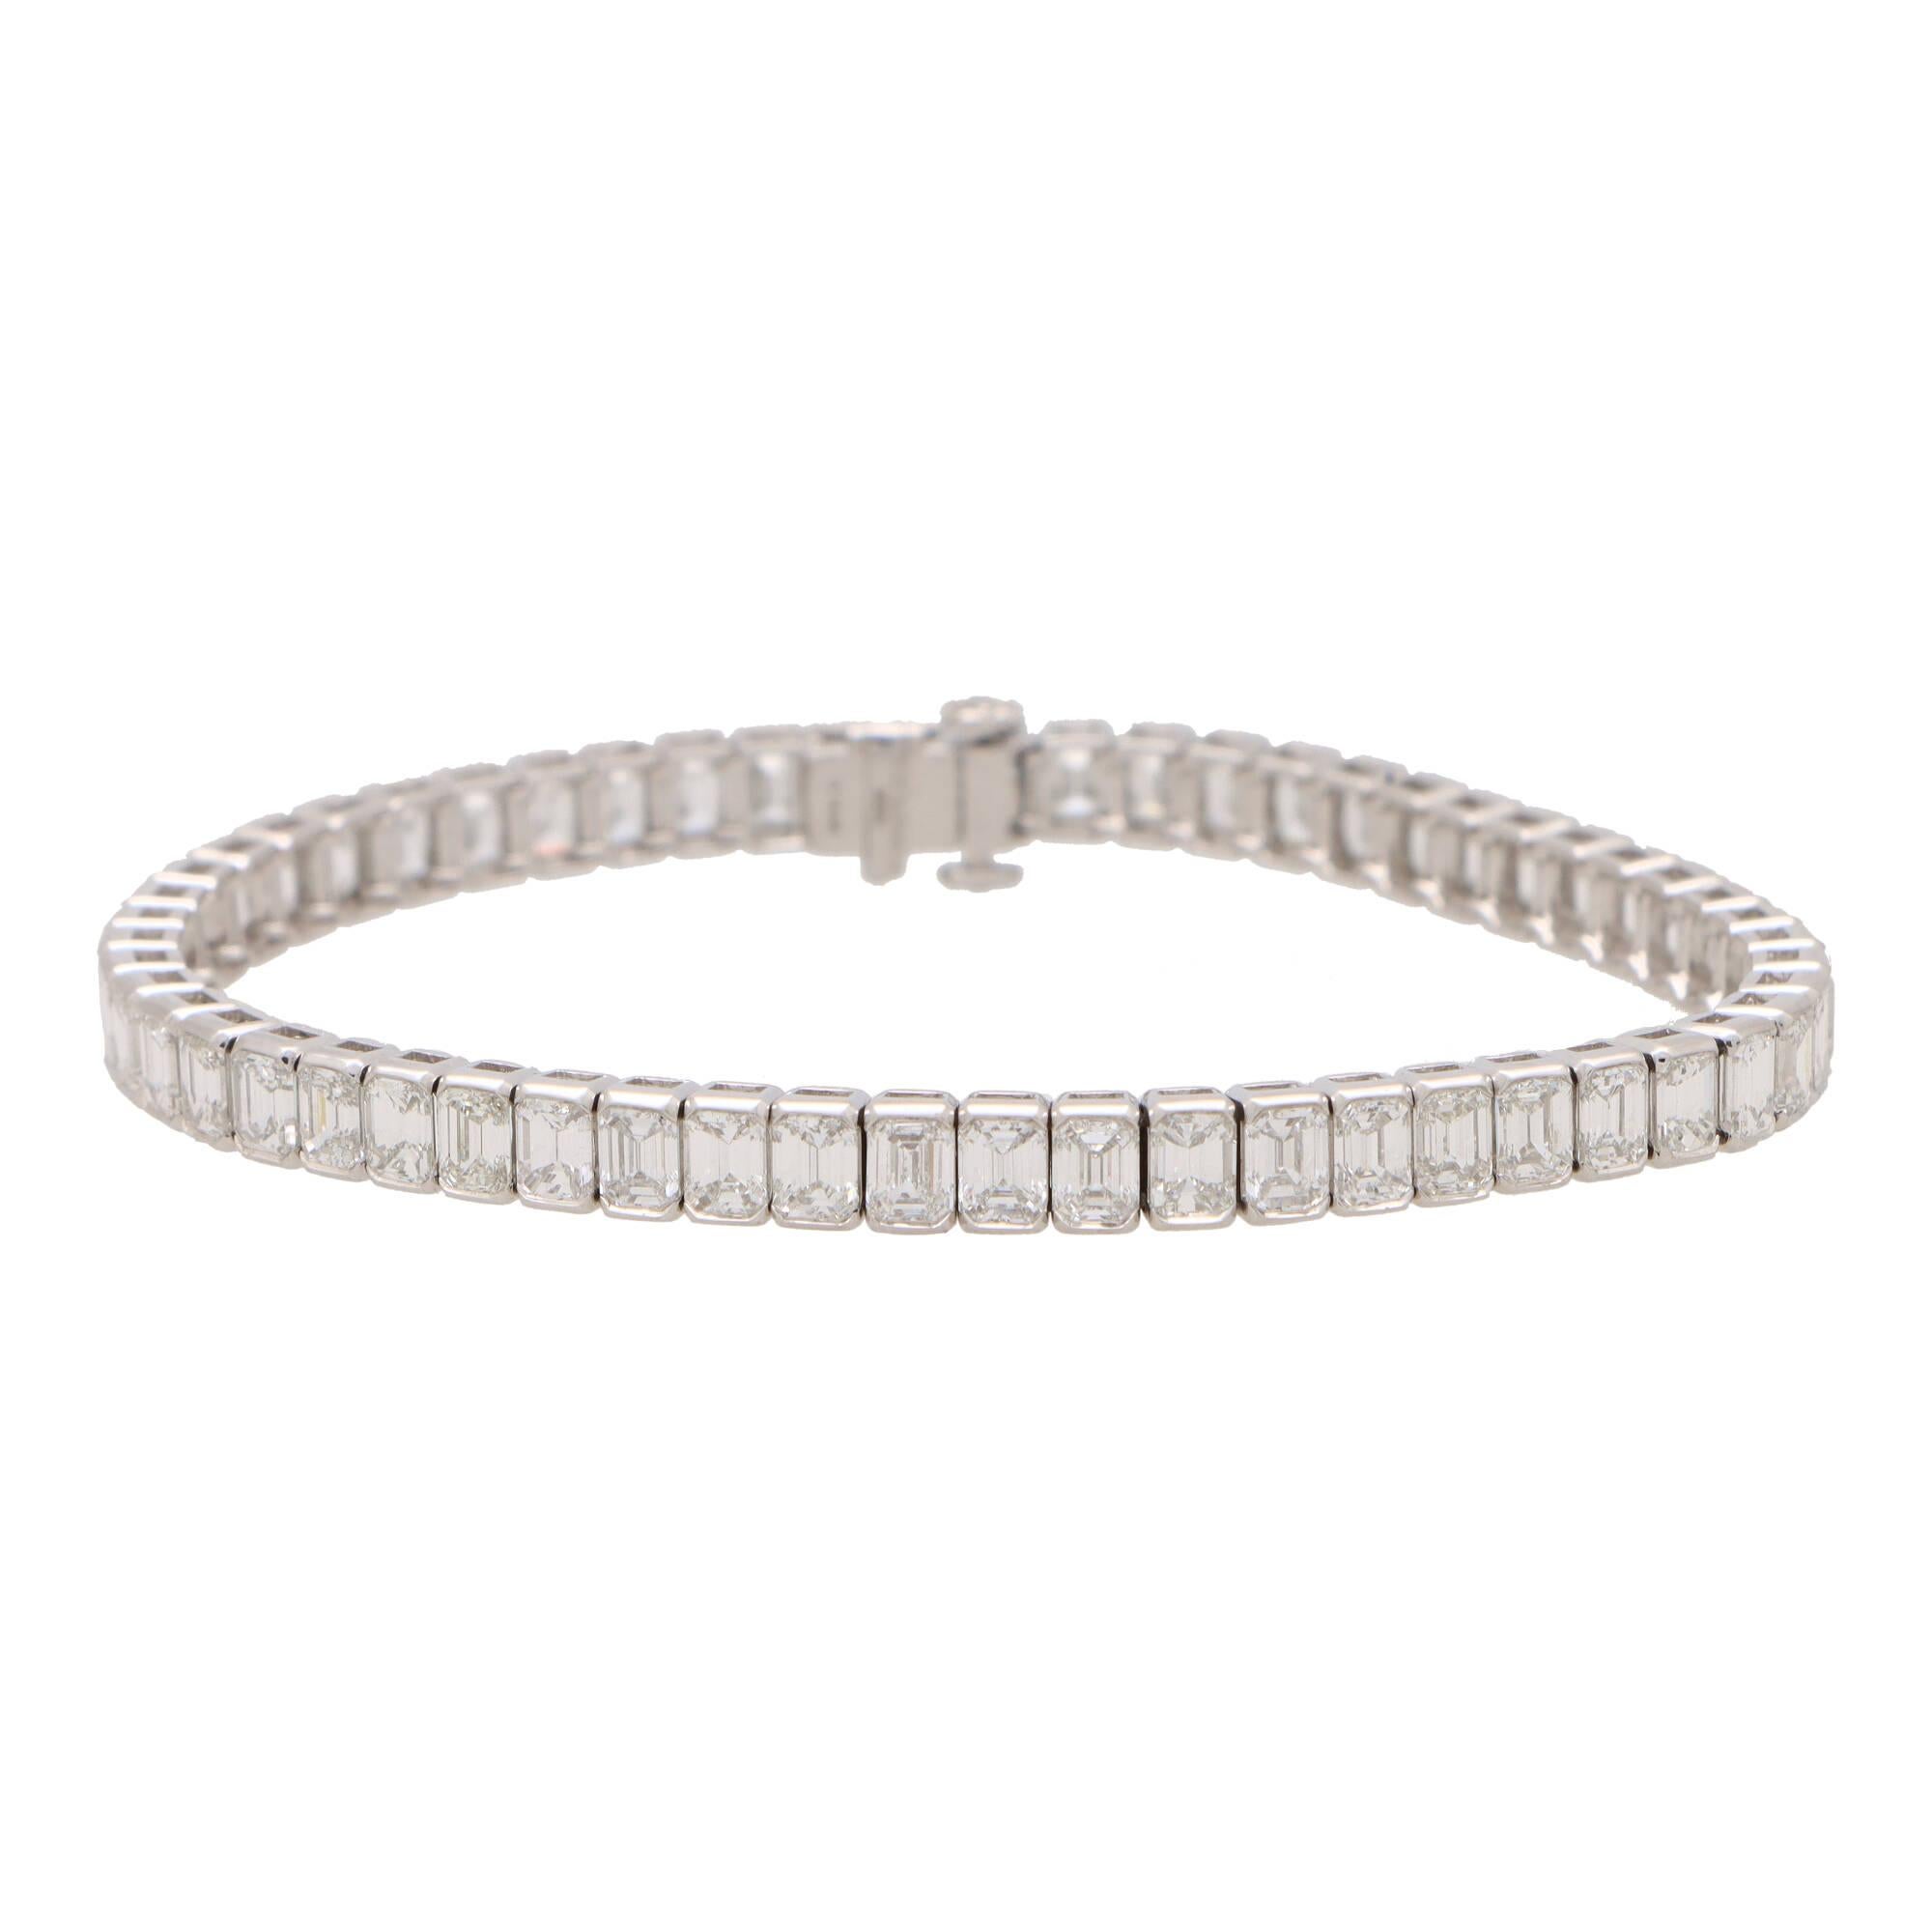 A beautiful contemporary emerald cut diamond line bracelet set in platinum.

The bracelet is composed of a grand total of 56 emerald cut sparkly diamonds, all of which are rubover set securely. The bracelet is secured with a push tongue clasp and